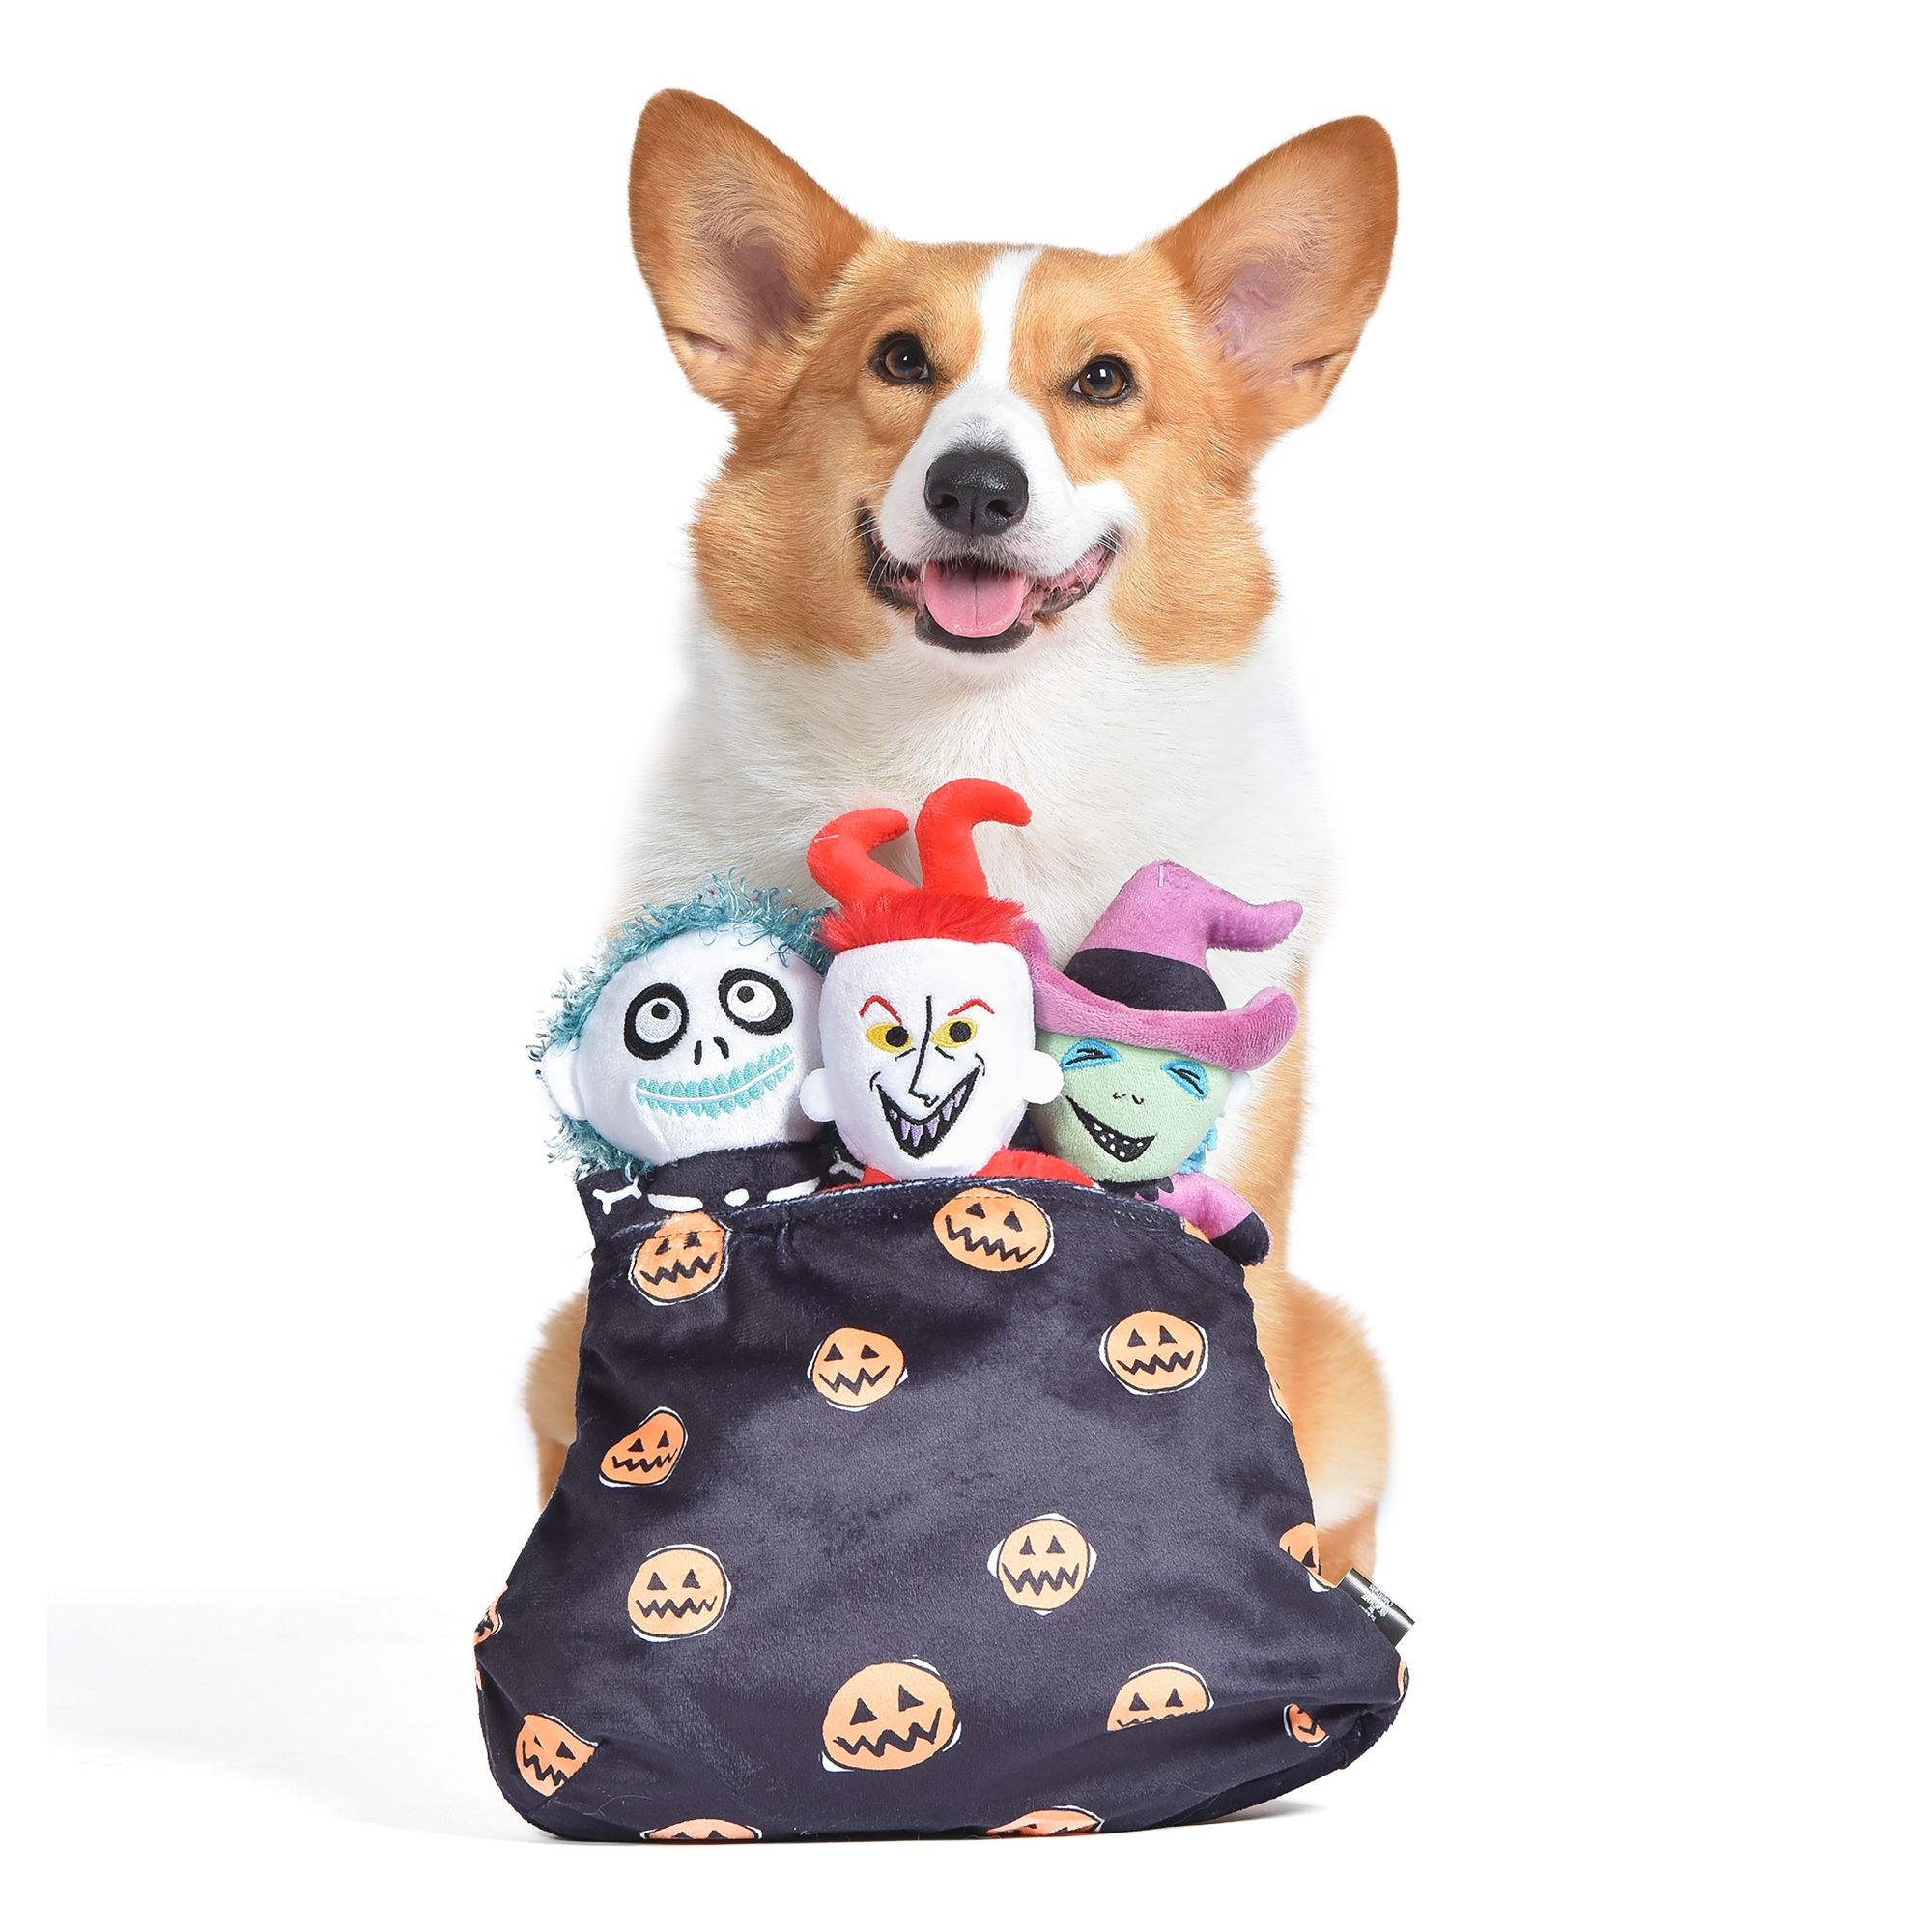 PetSmart unveils Halloween collection featuring adorable guinea